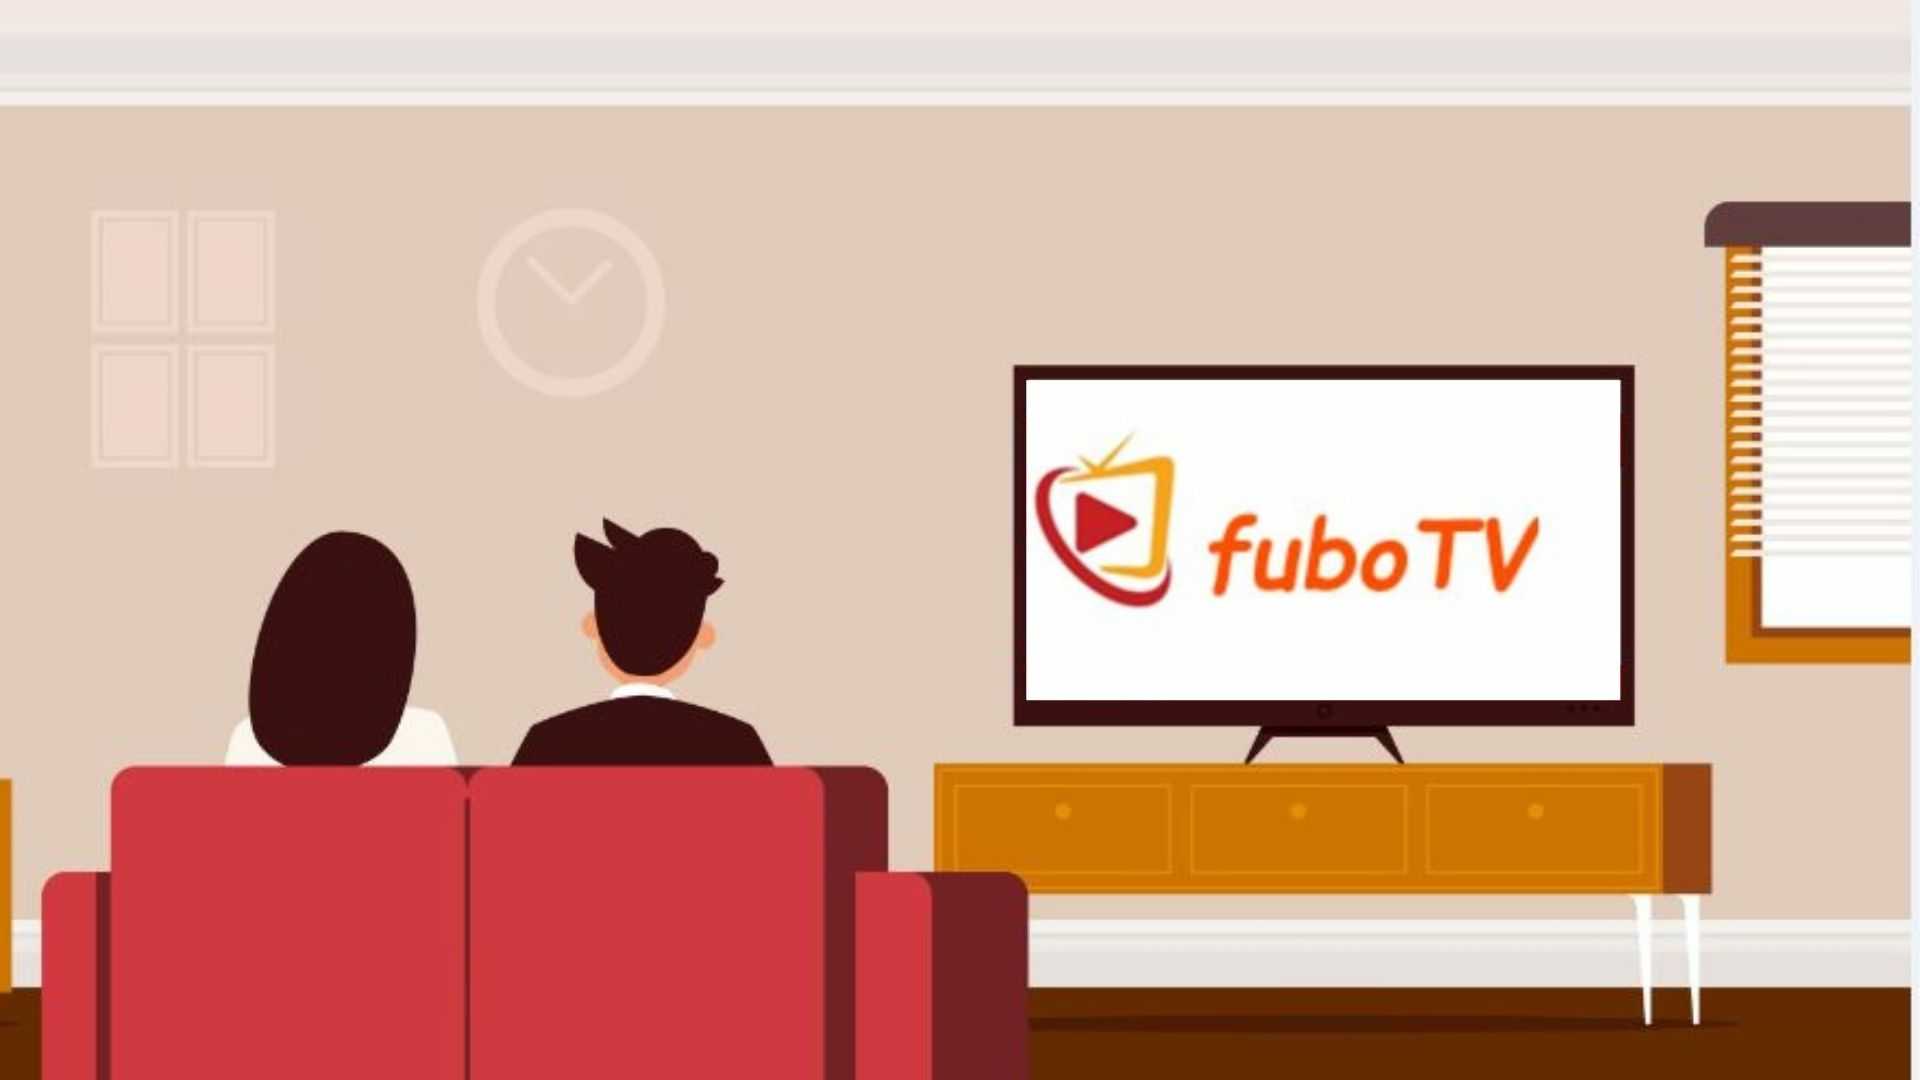 How to do FuboTV Activation?